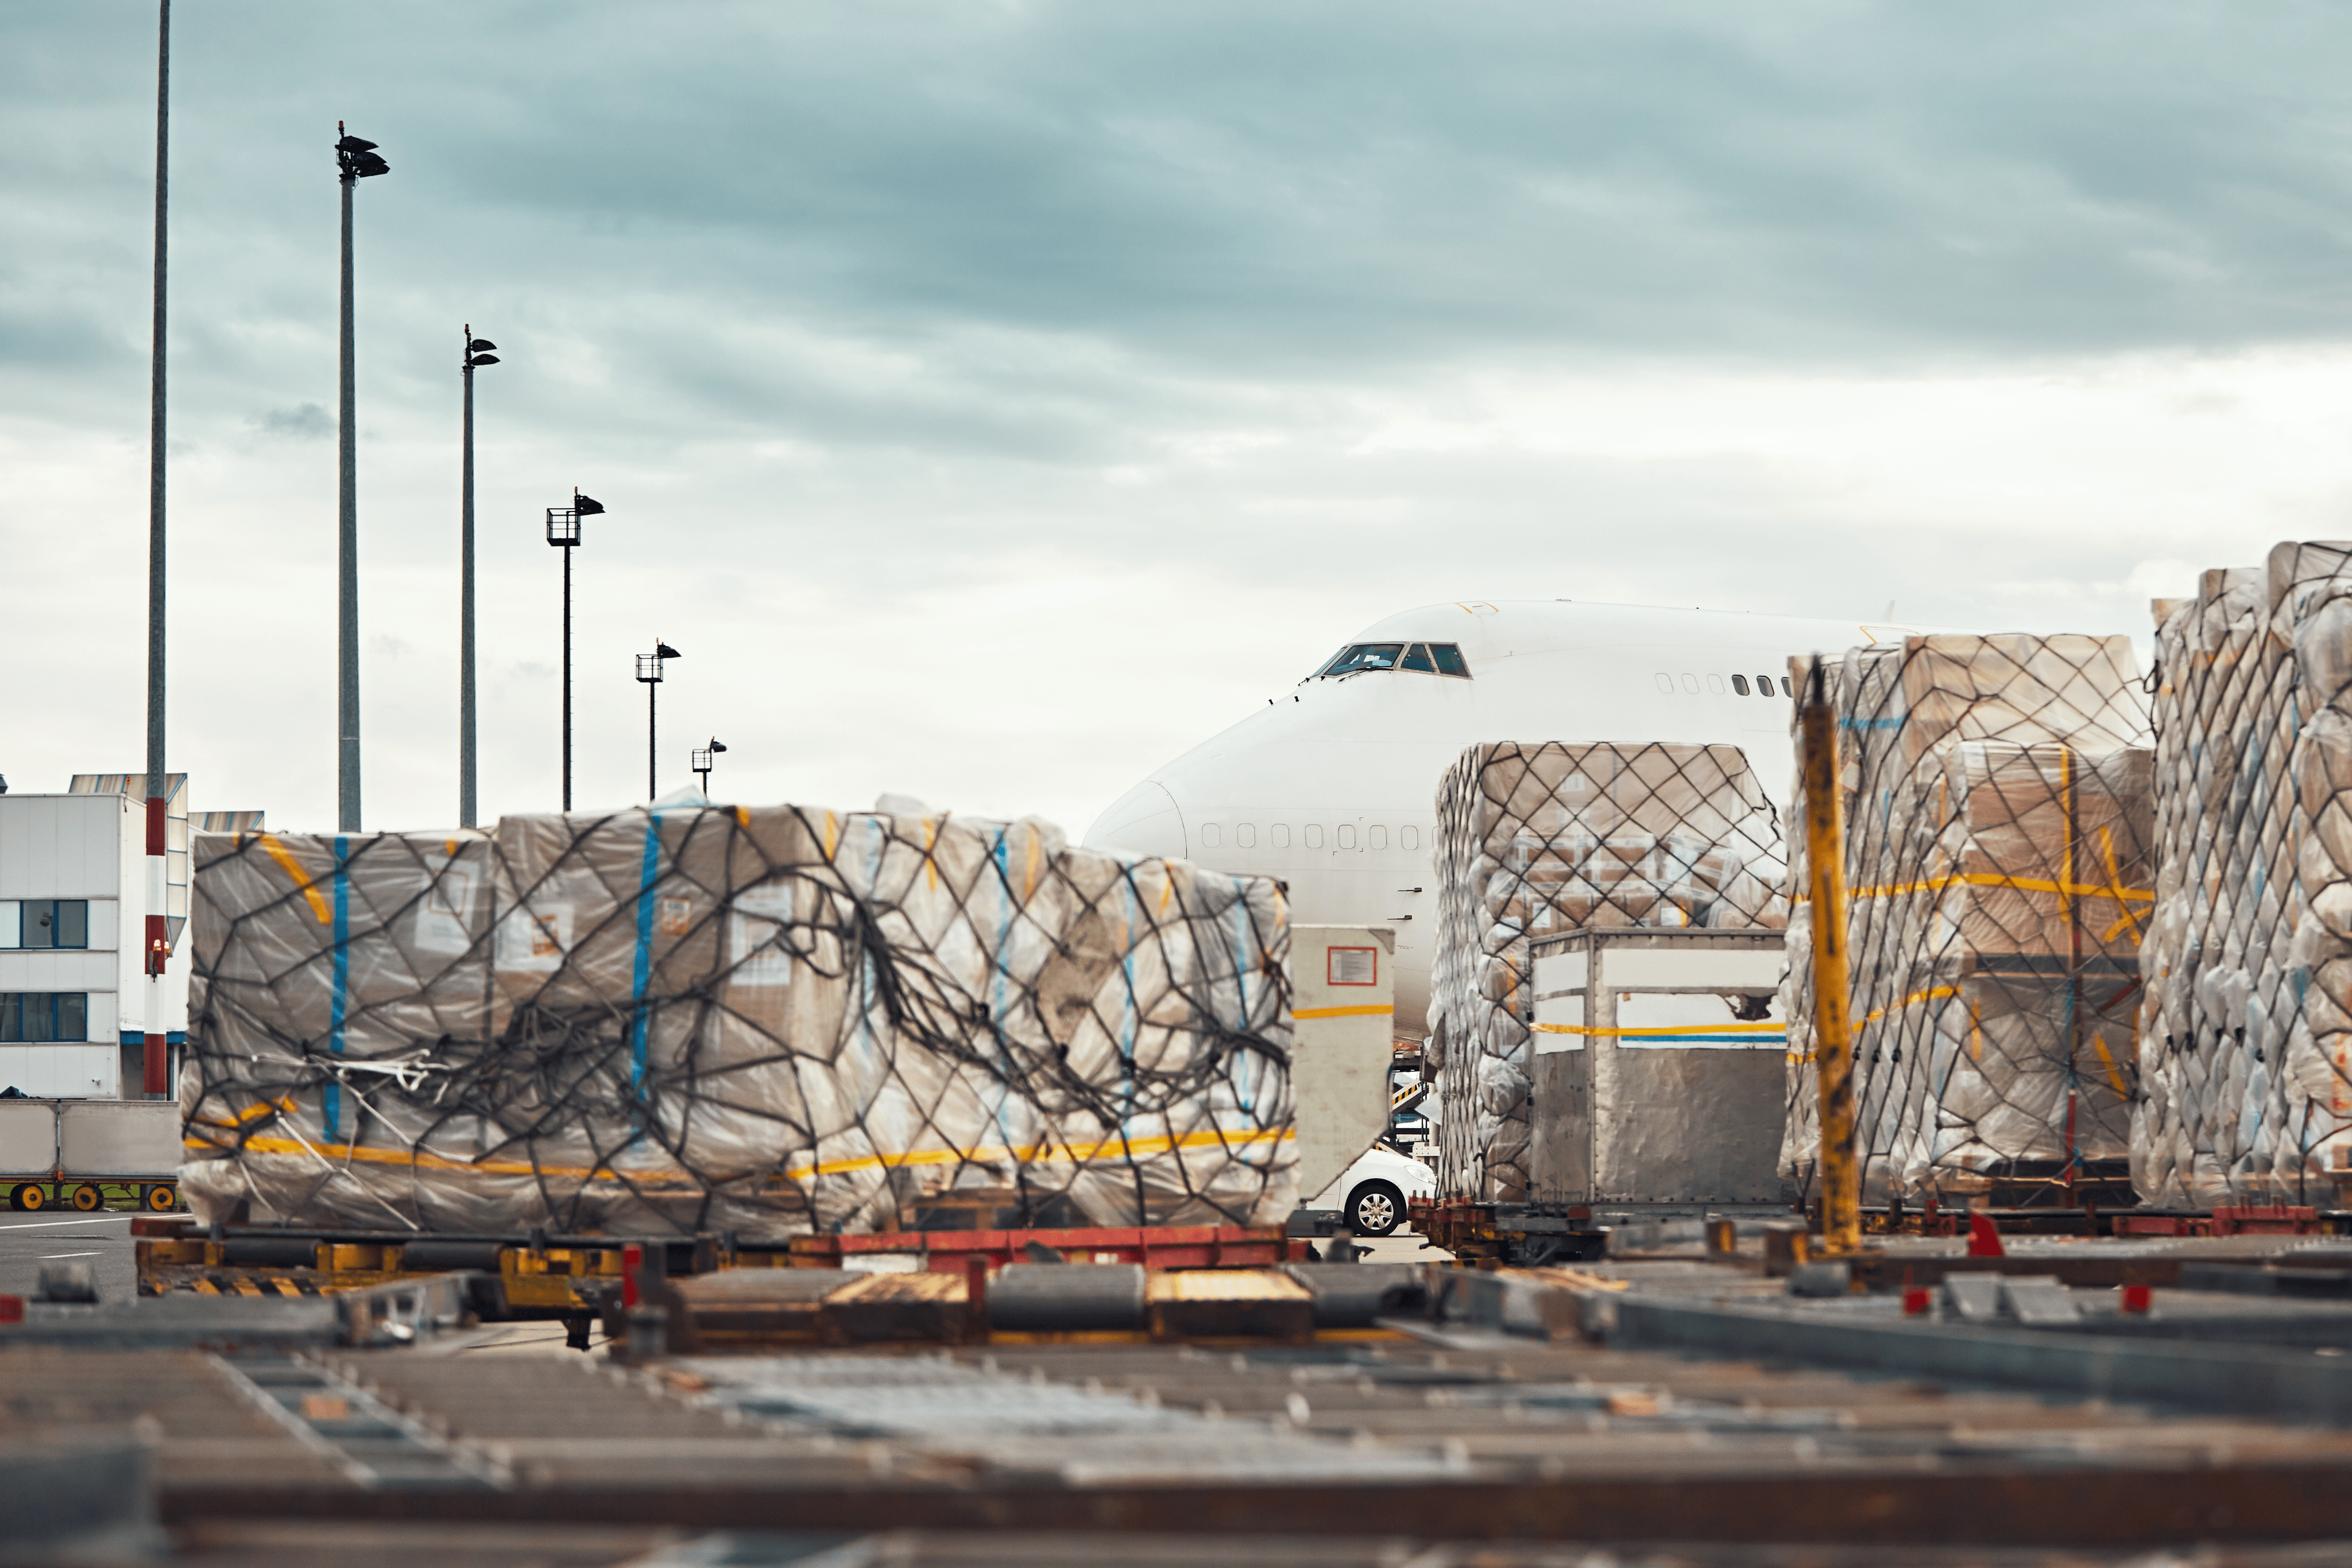 Supply chain crisis leads to air cargo capacity scarcity during peak season